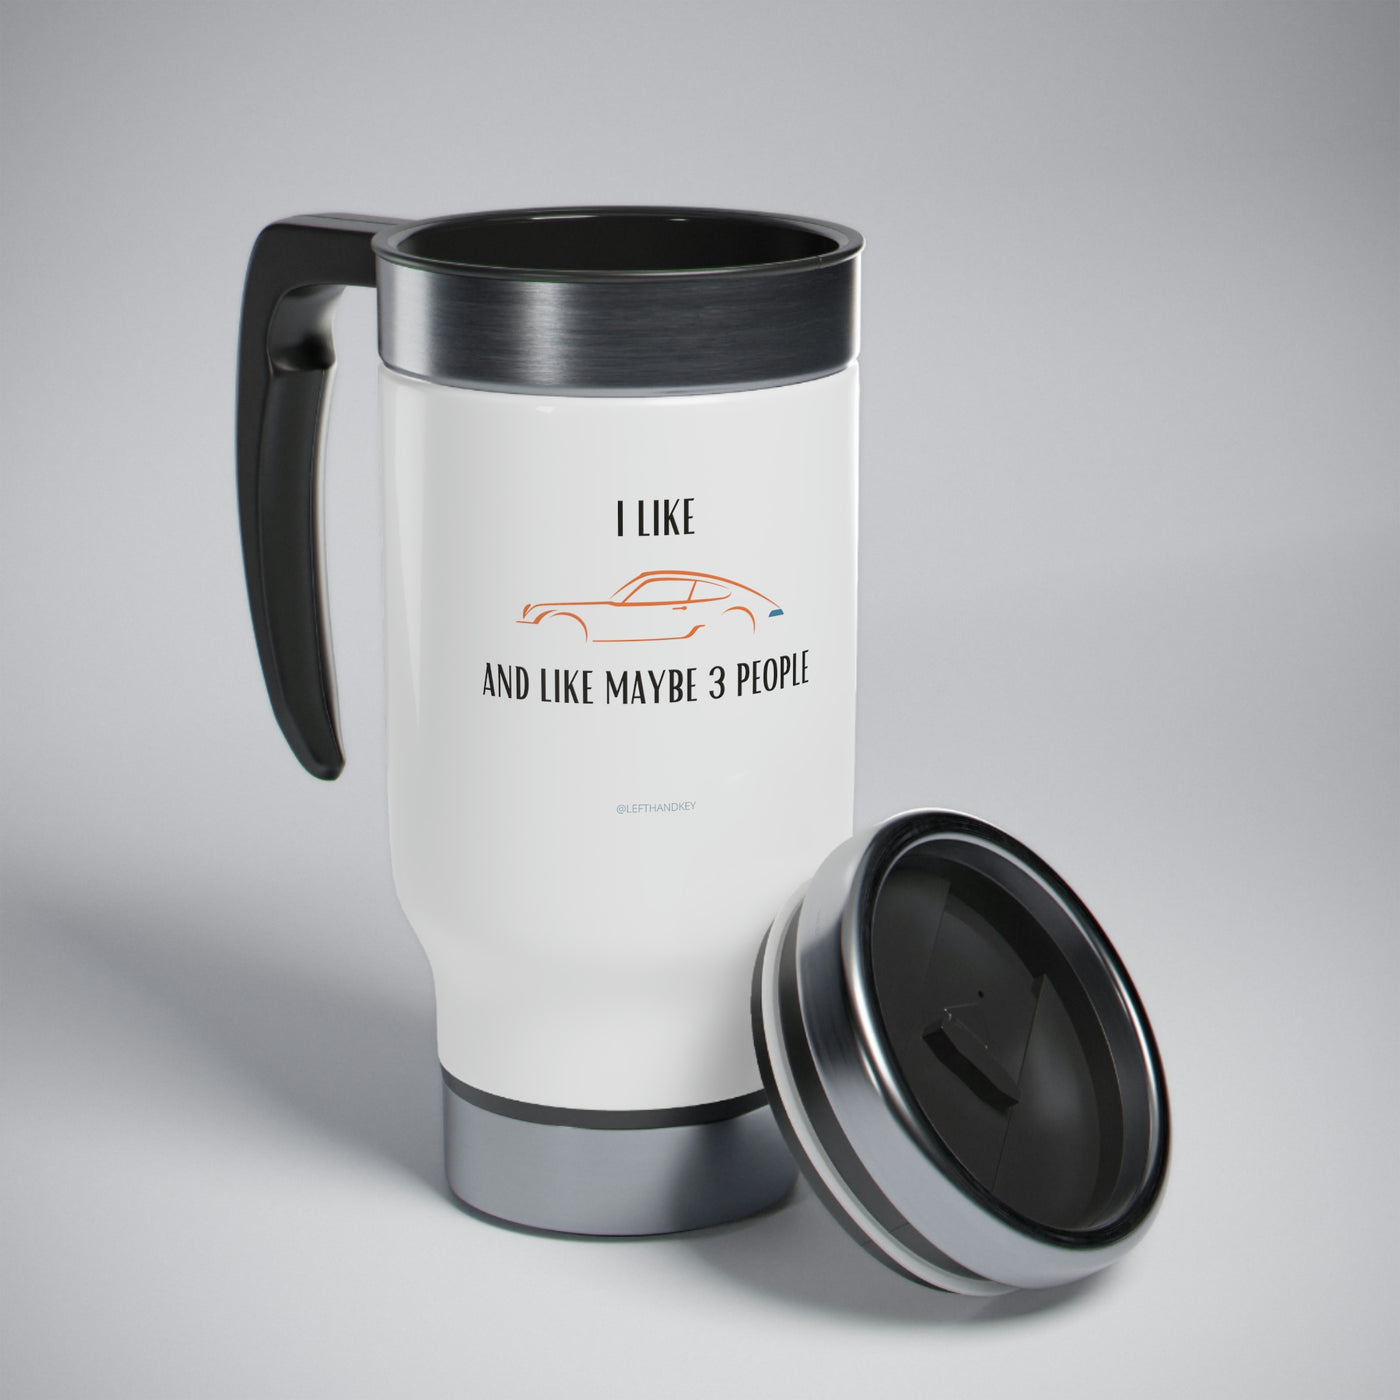 People Who Love to Eat Are Always the Best - Travel mug with a Handle